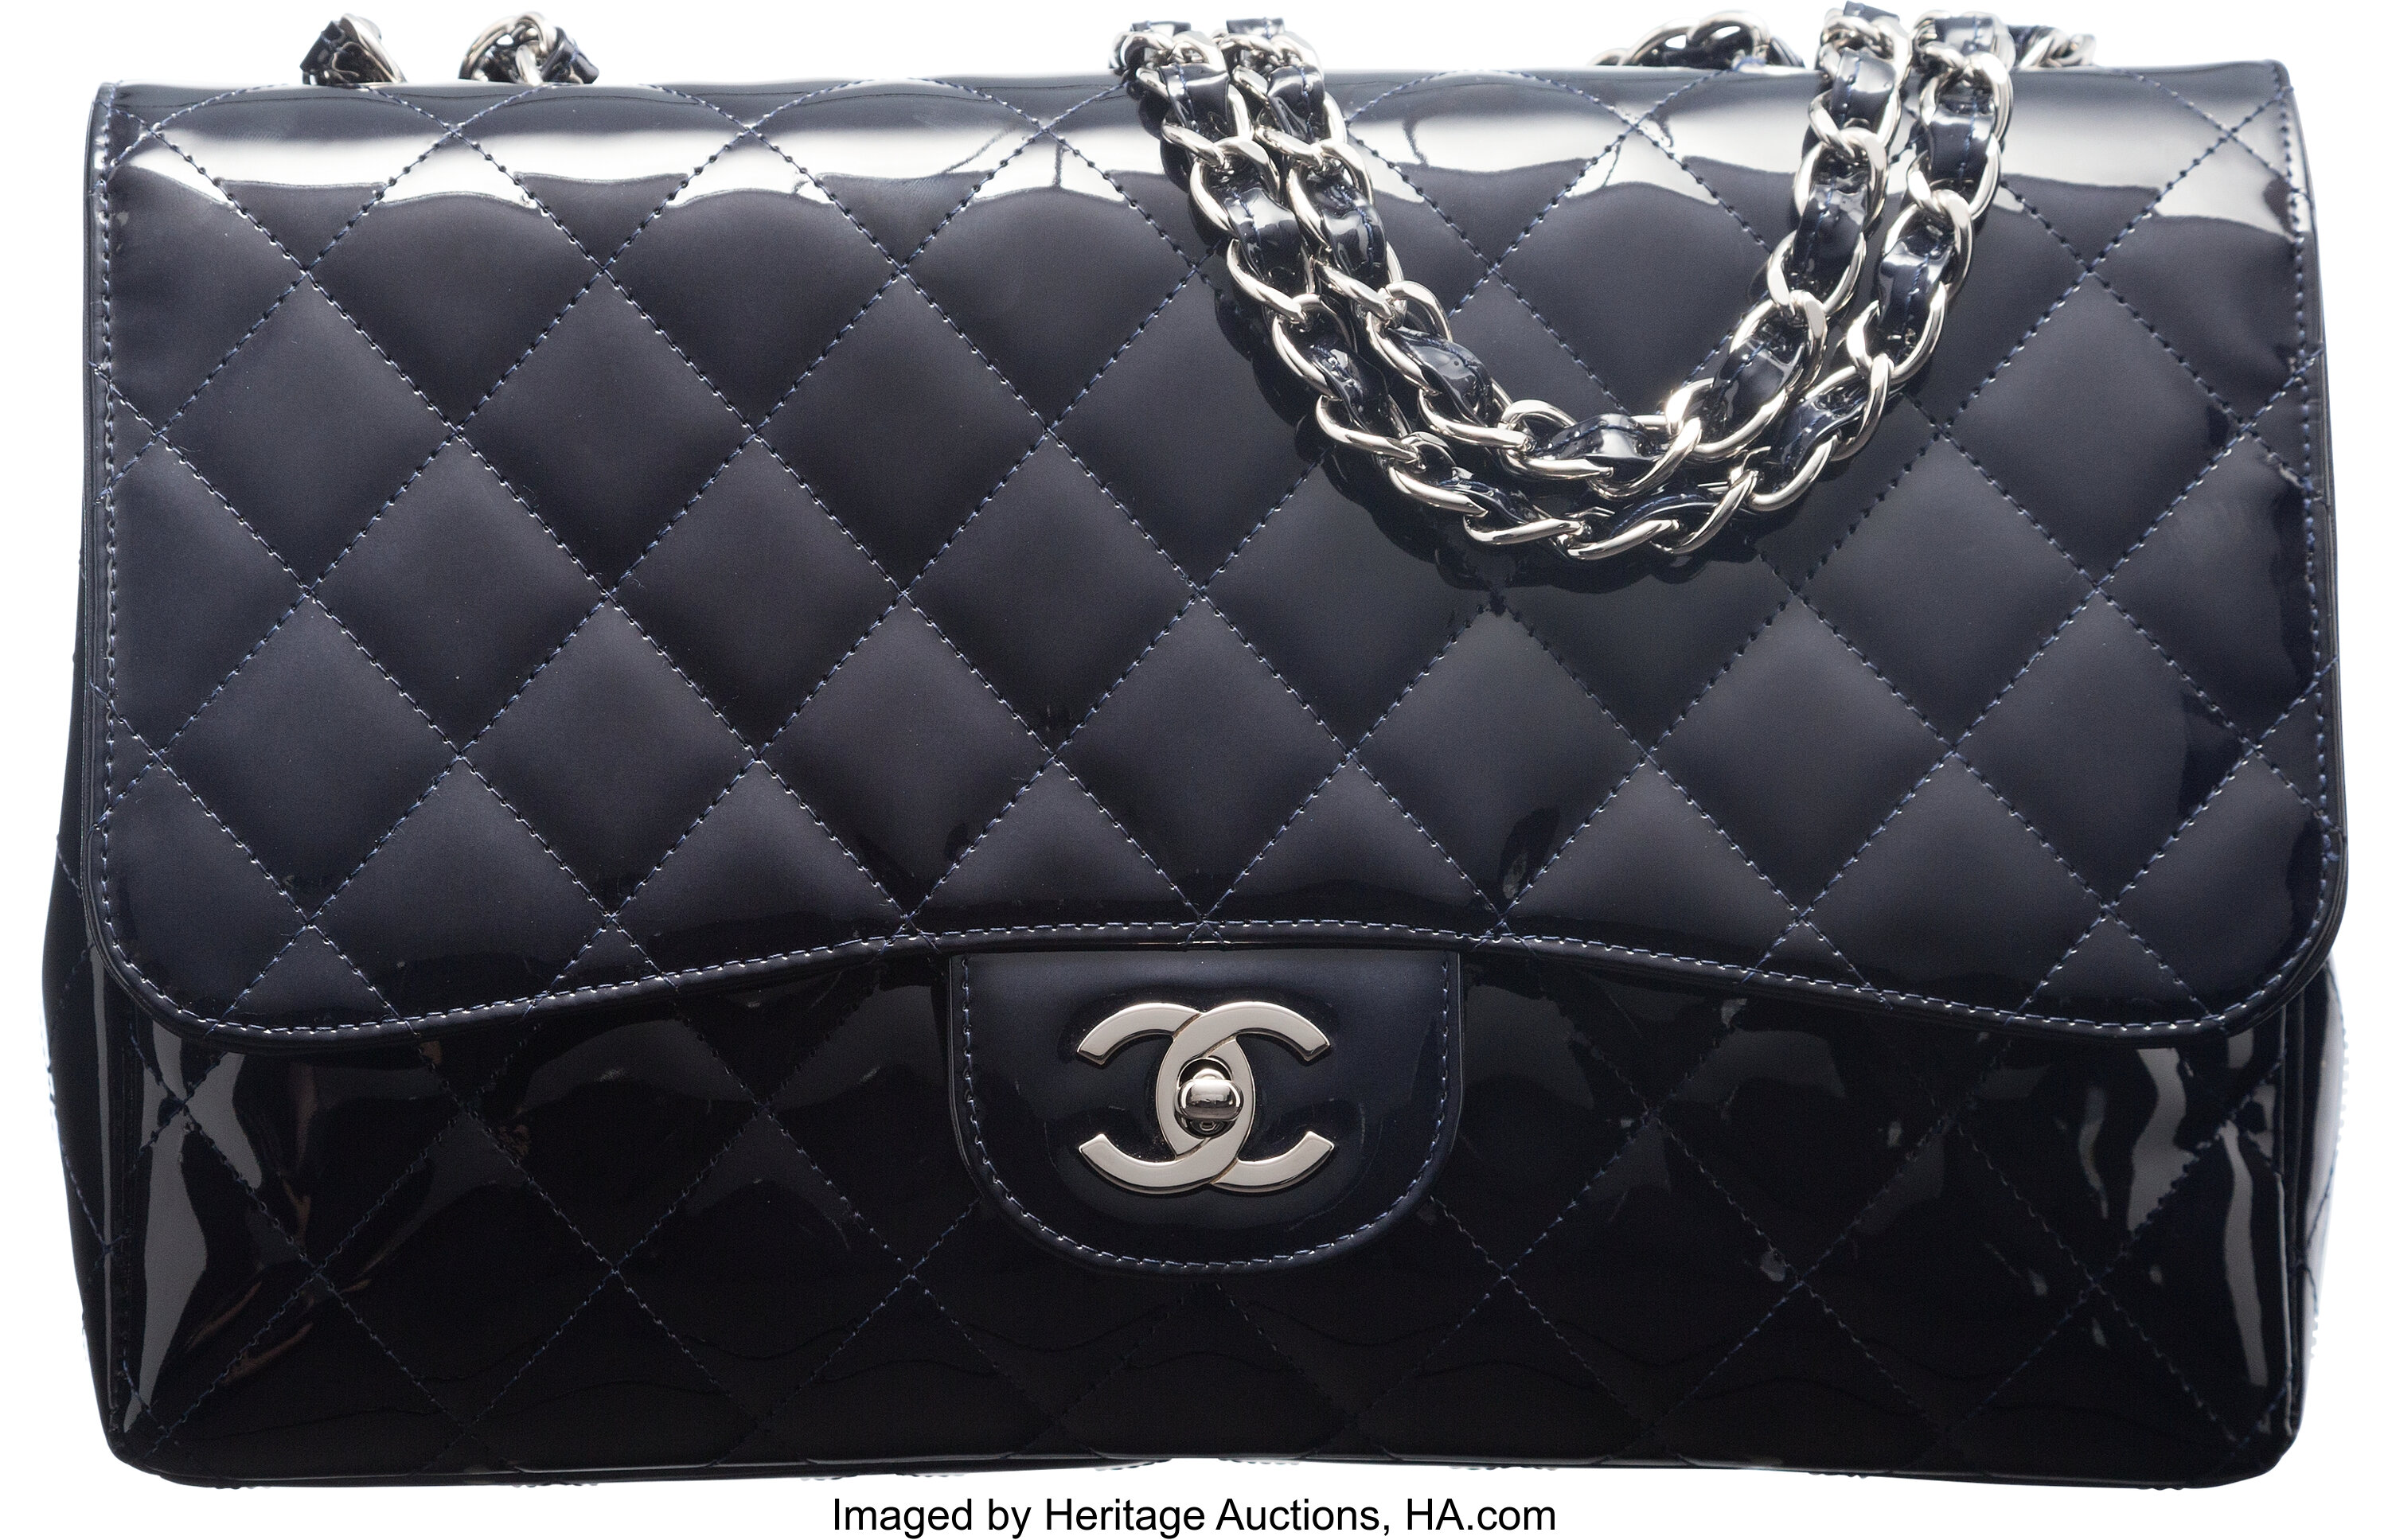 100% AUTH NEW Chanel Dust Bag Karl Lagerfeld Edition Large JUMBO Classic Bag